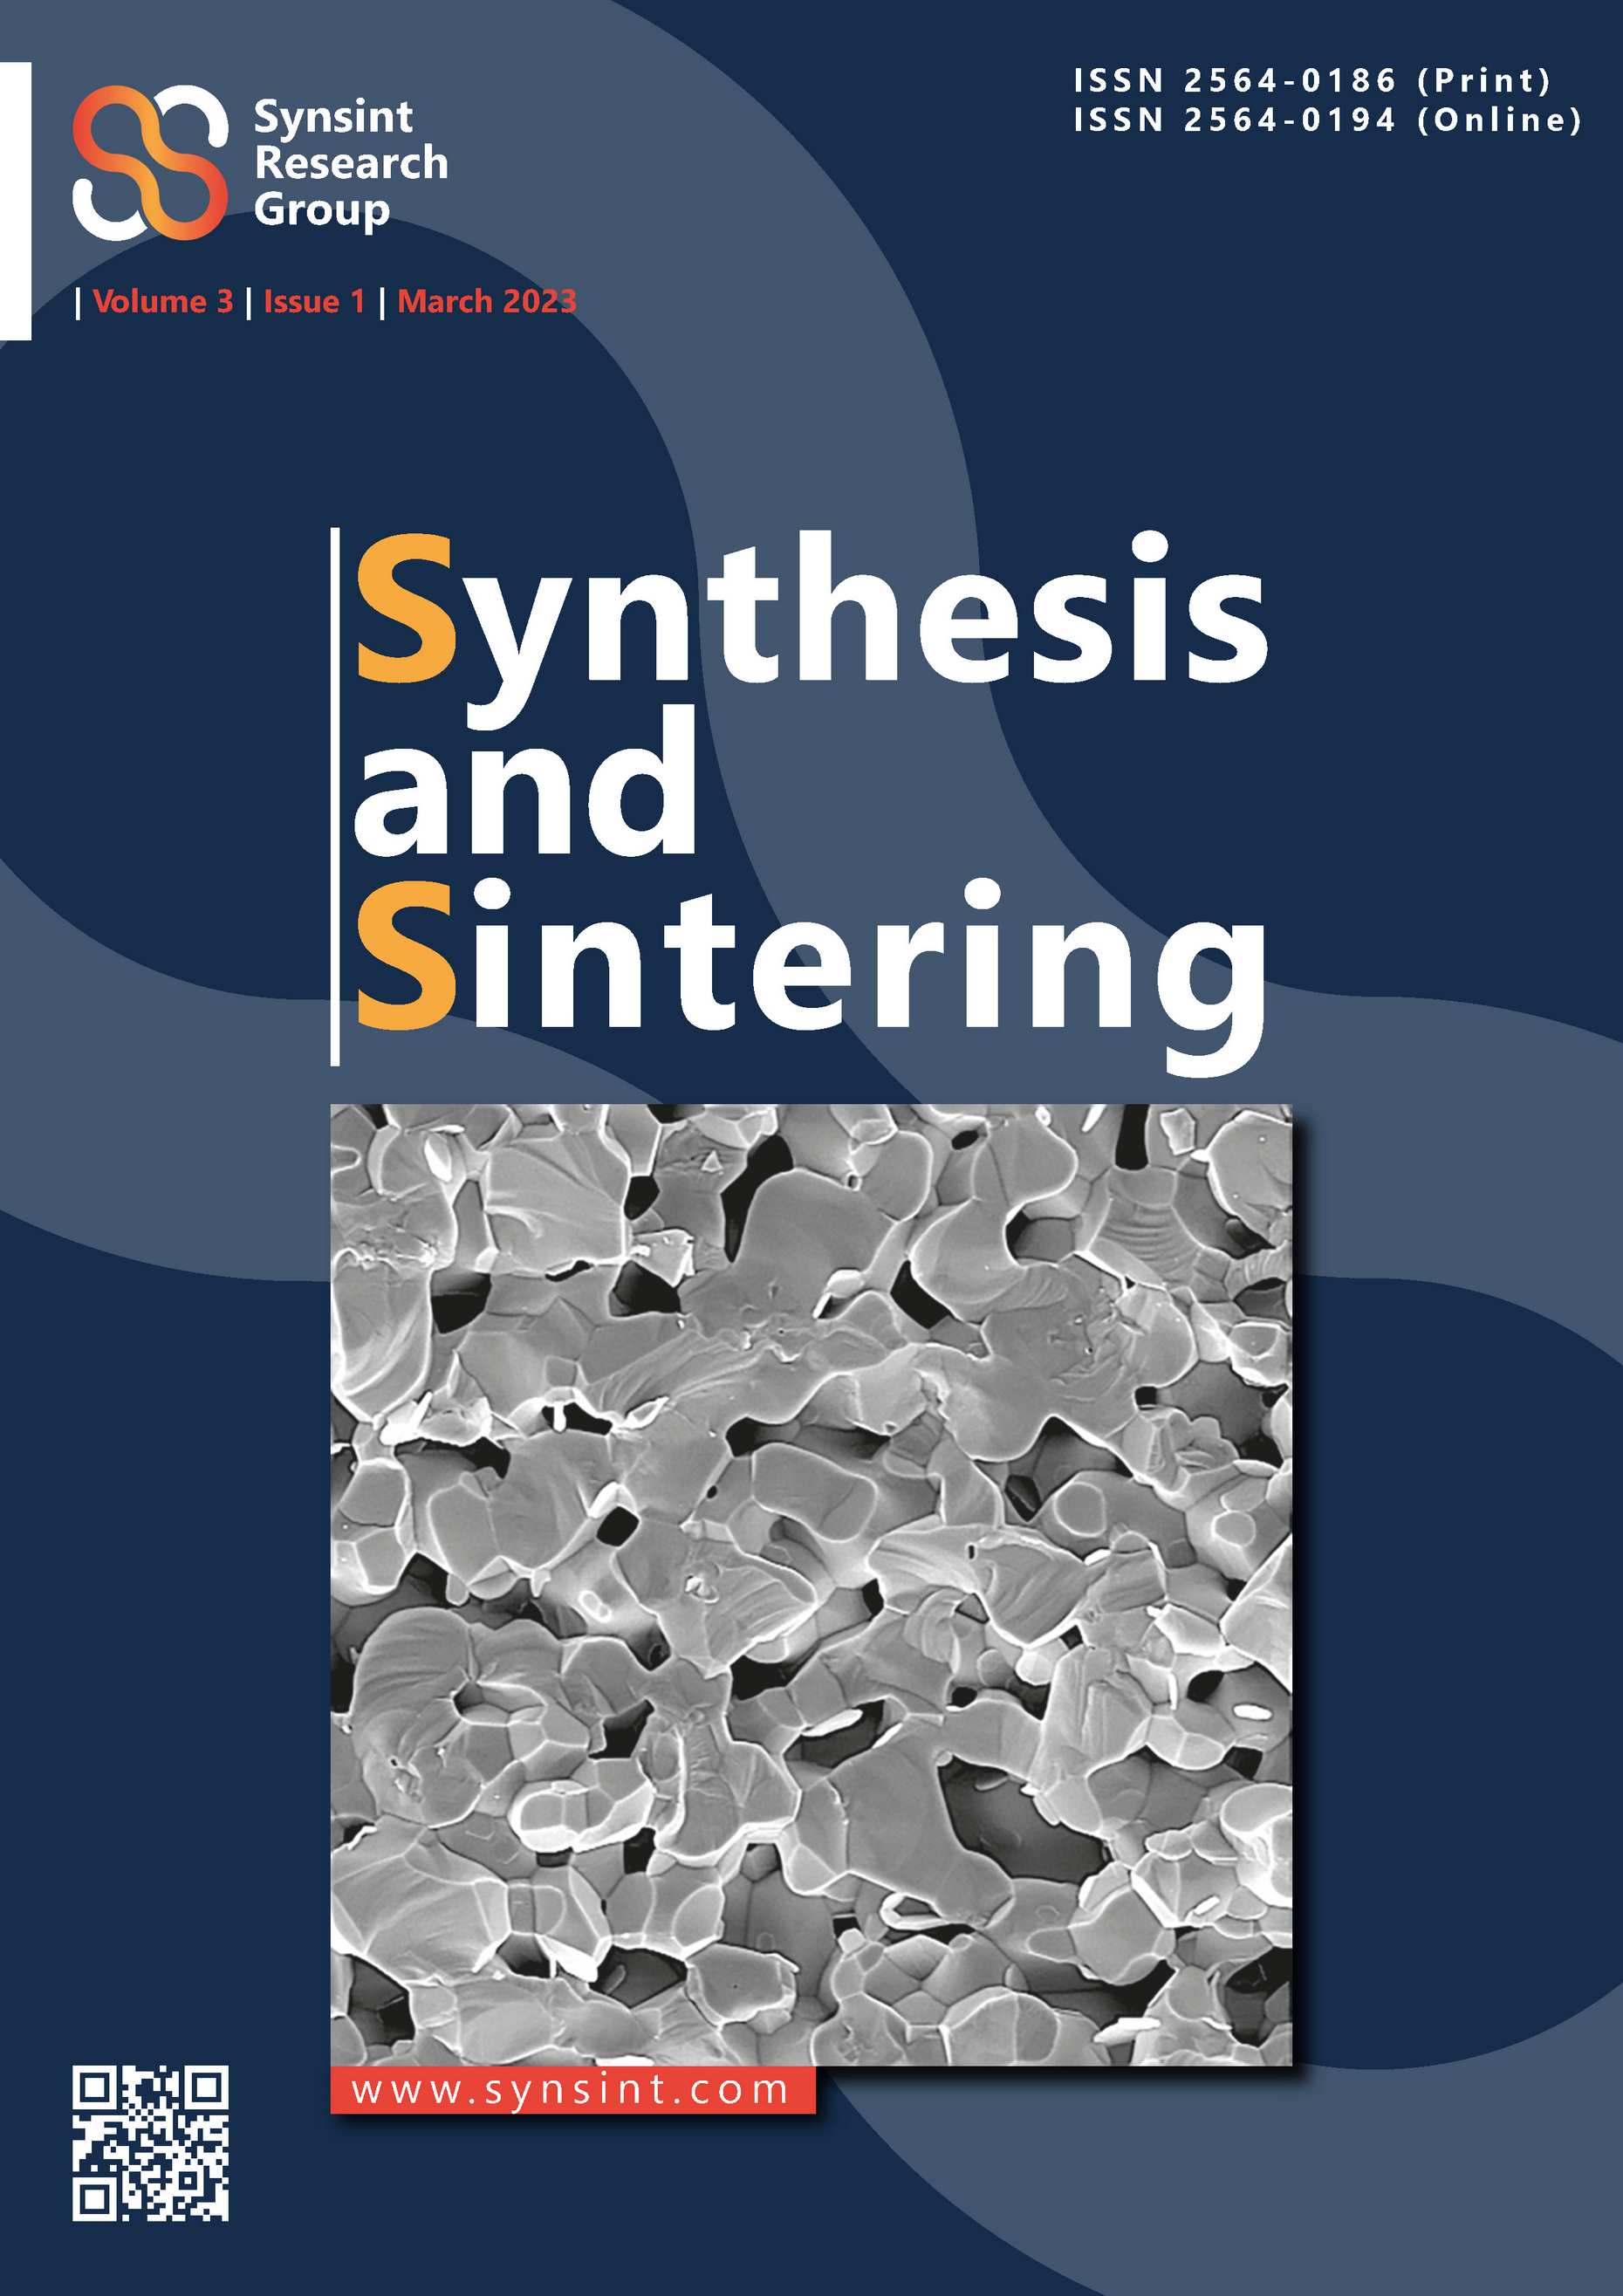 Synthesis and Sintering Vol. 3 No. 1 (2023)